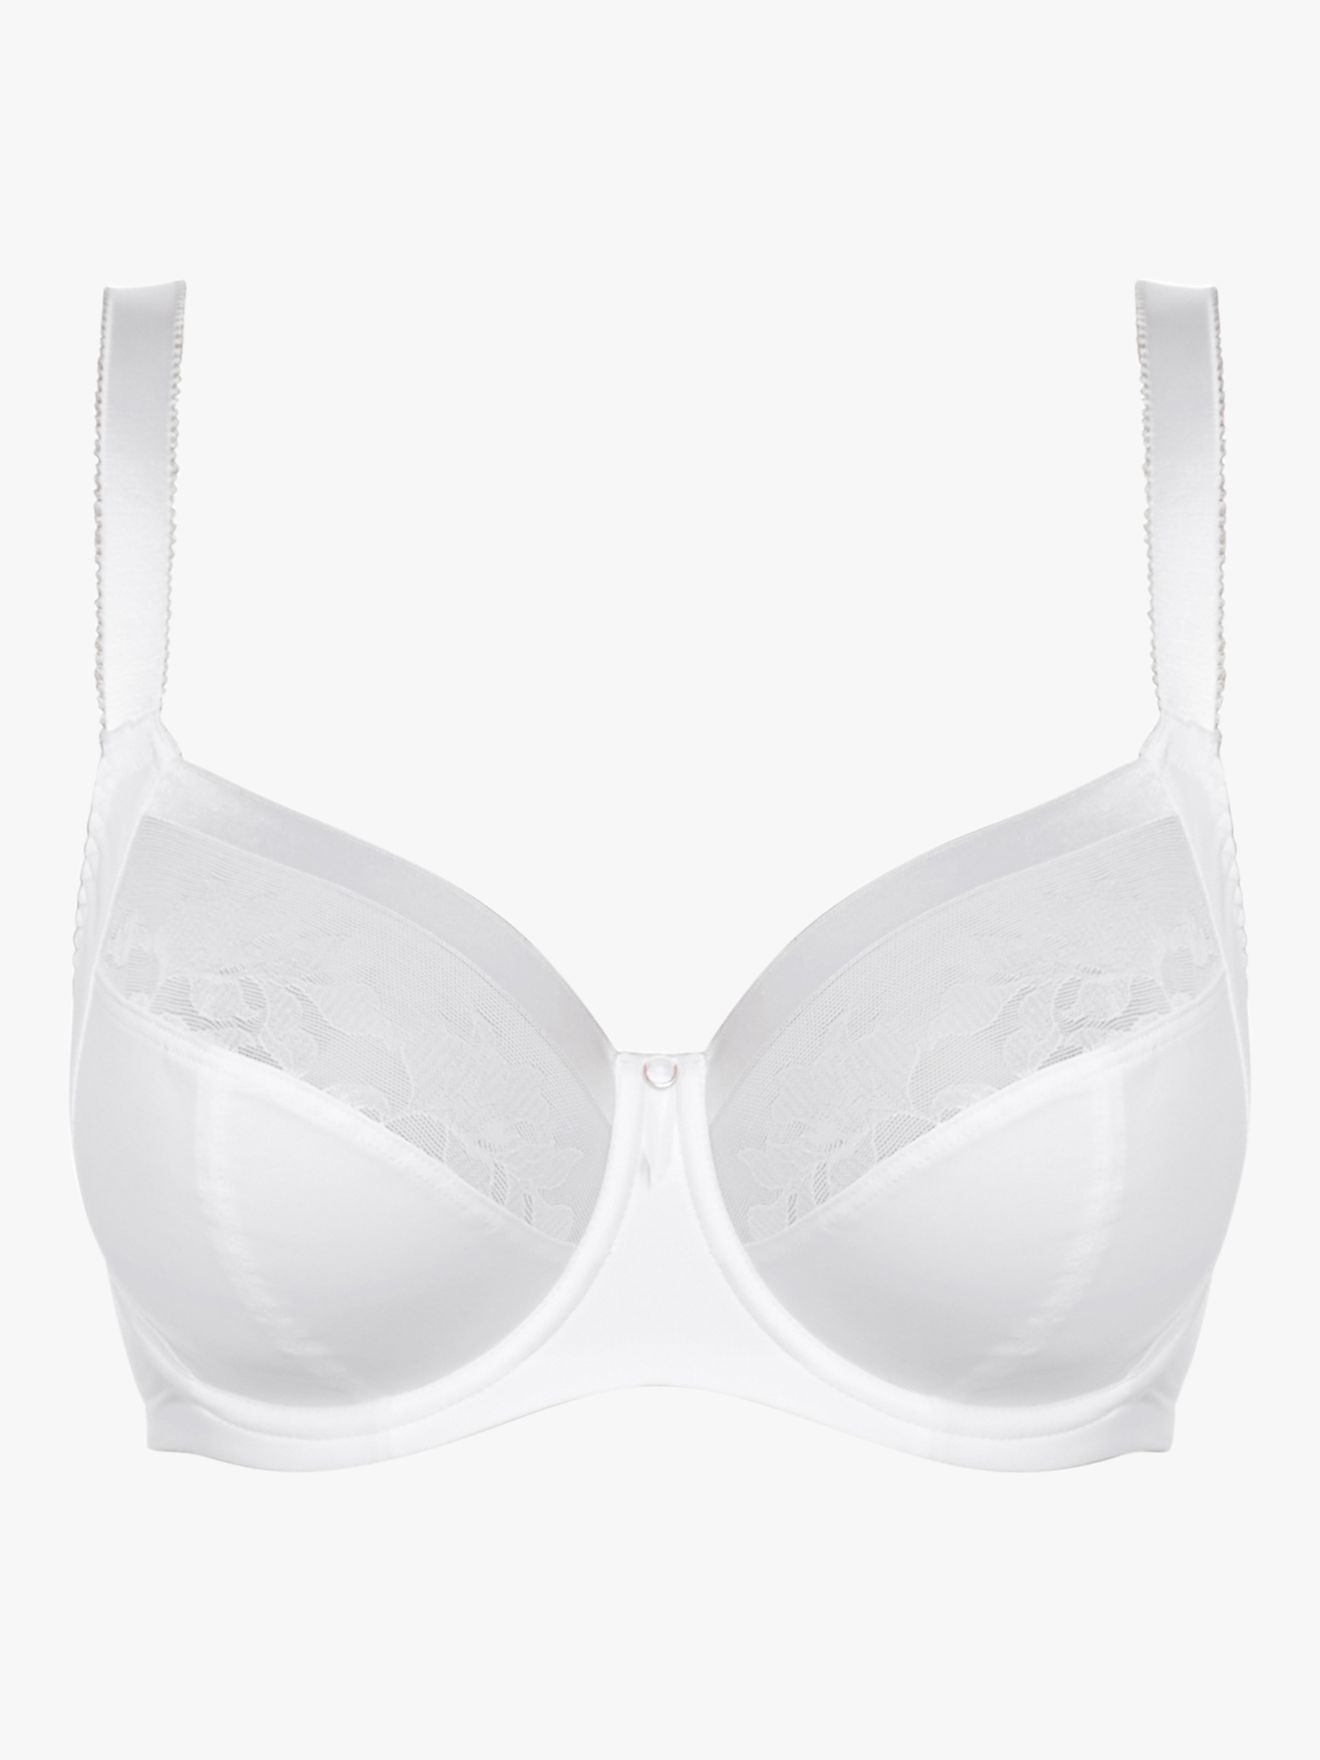 Fantasie Illusion Underwired Side Support Balcony Bra, White at